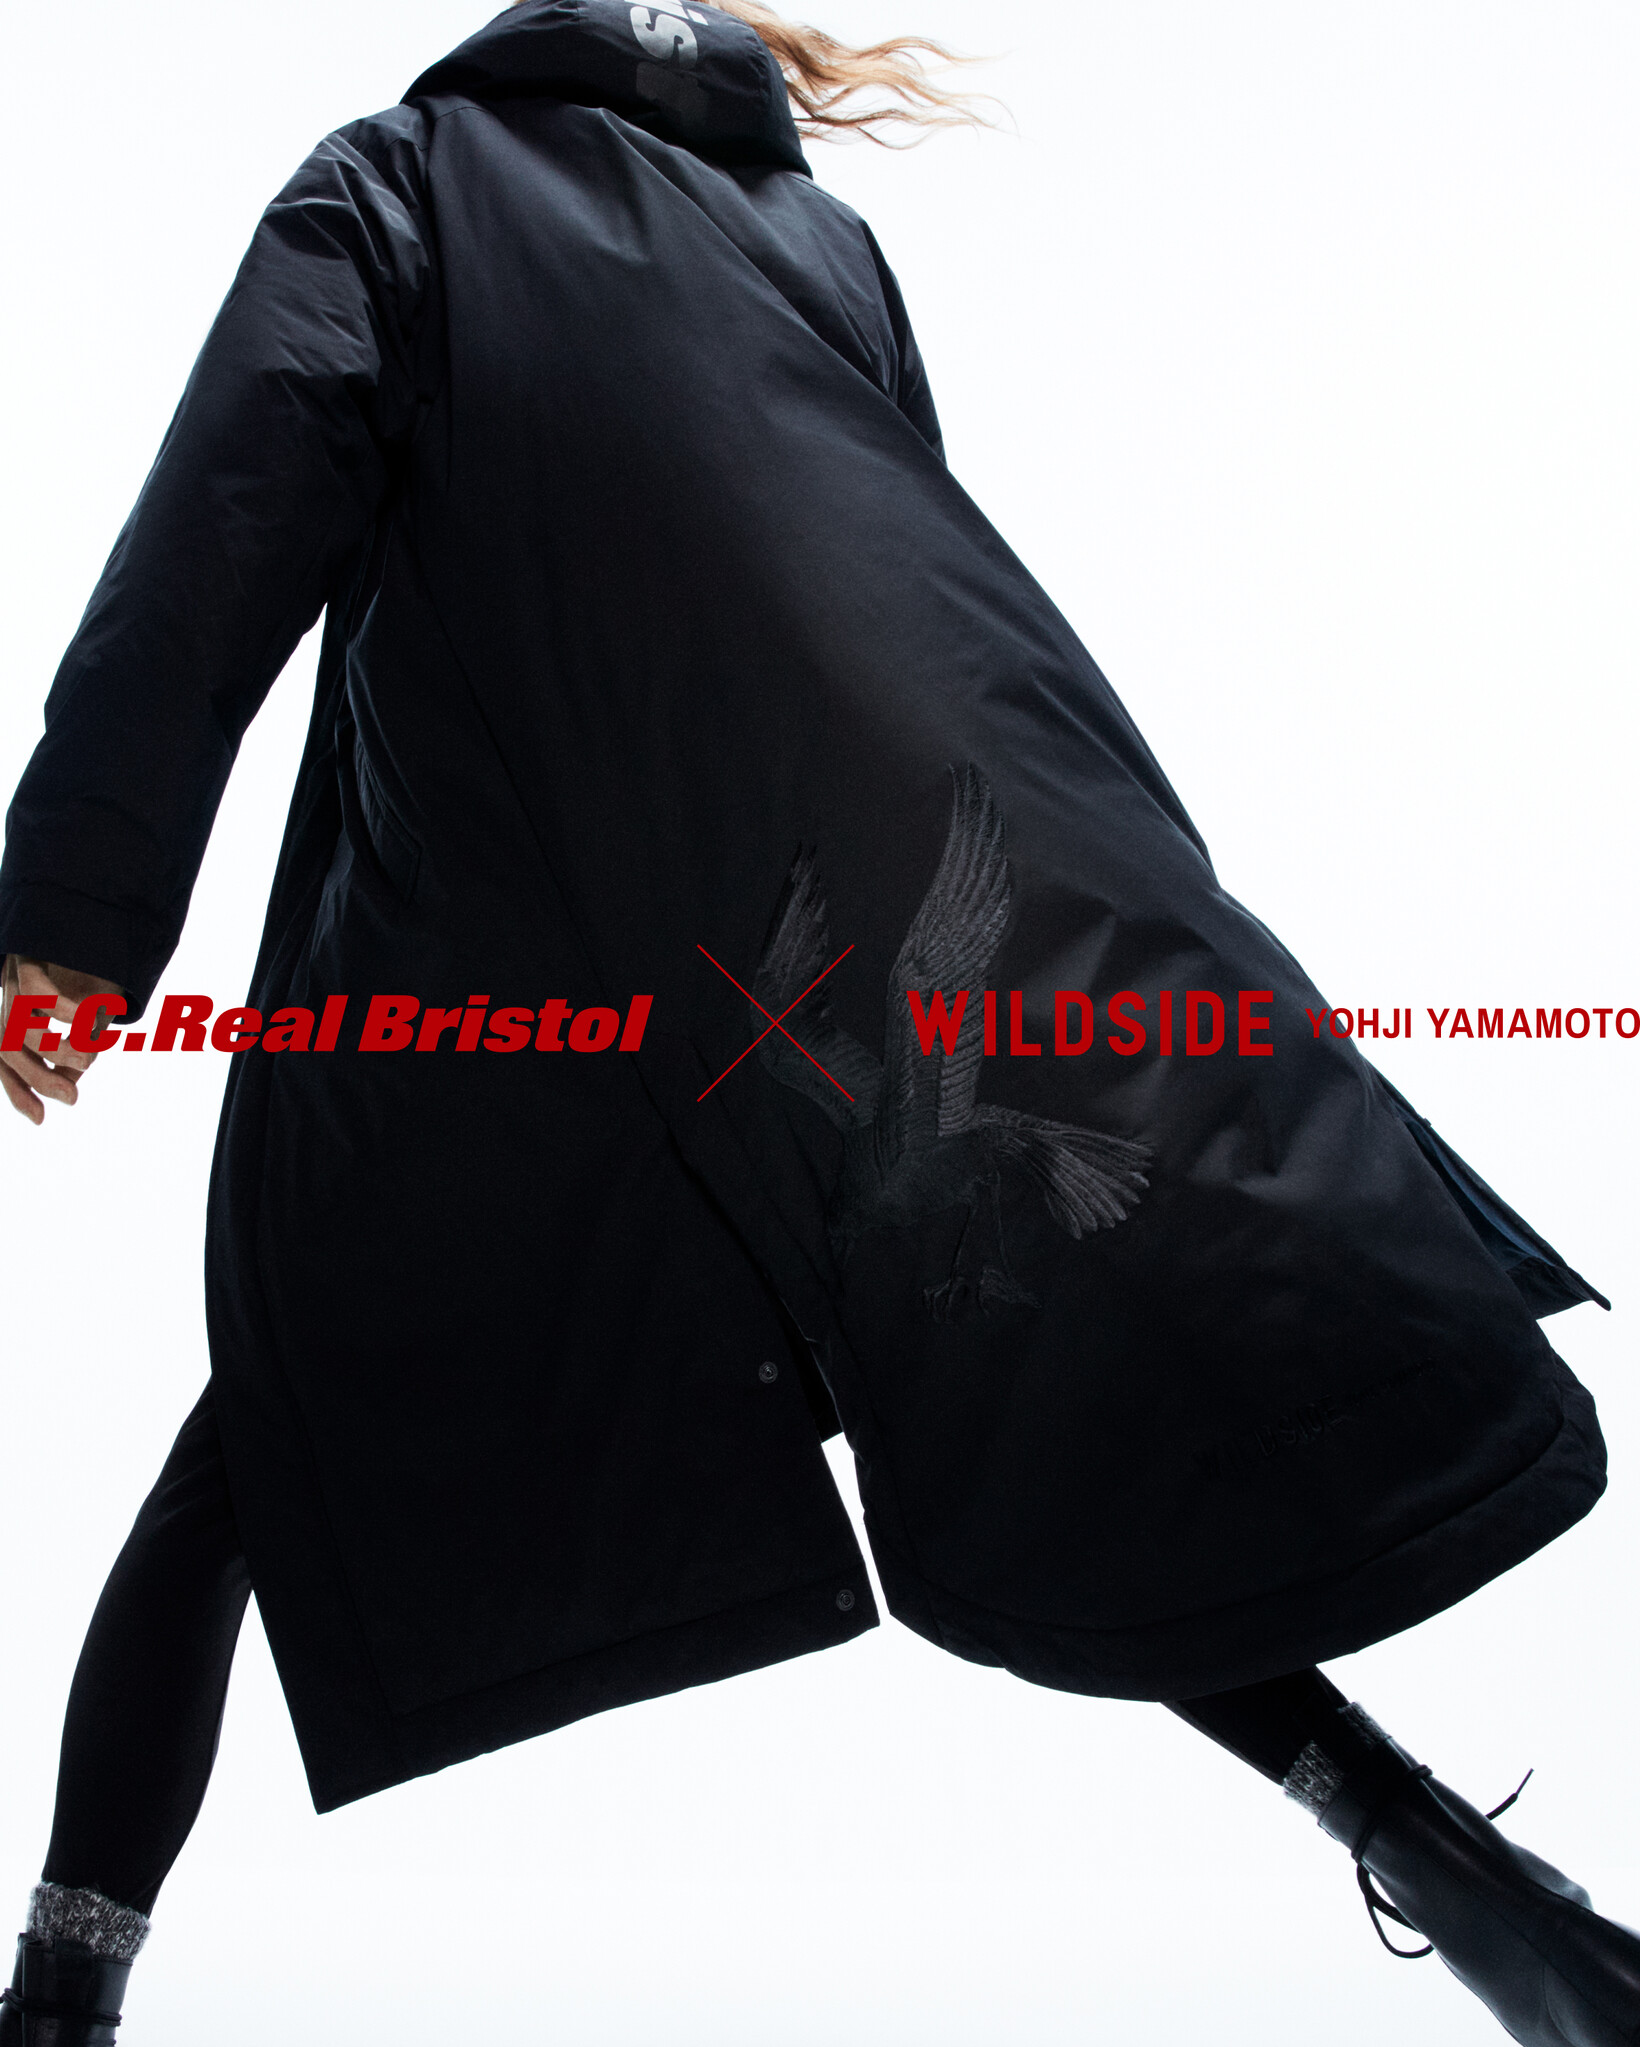 WILDSIDE×F.C.Real Bristol Collaboration Collectionを11月2日(木 ...